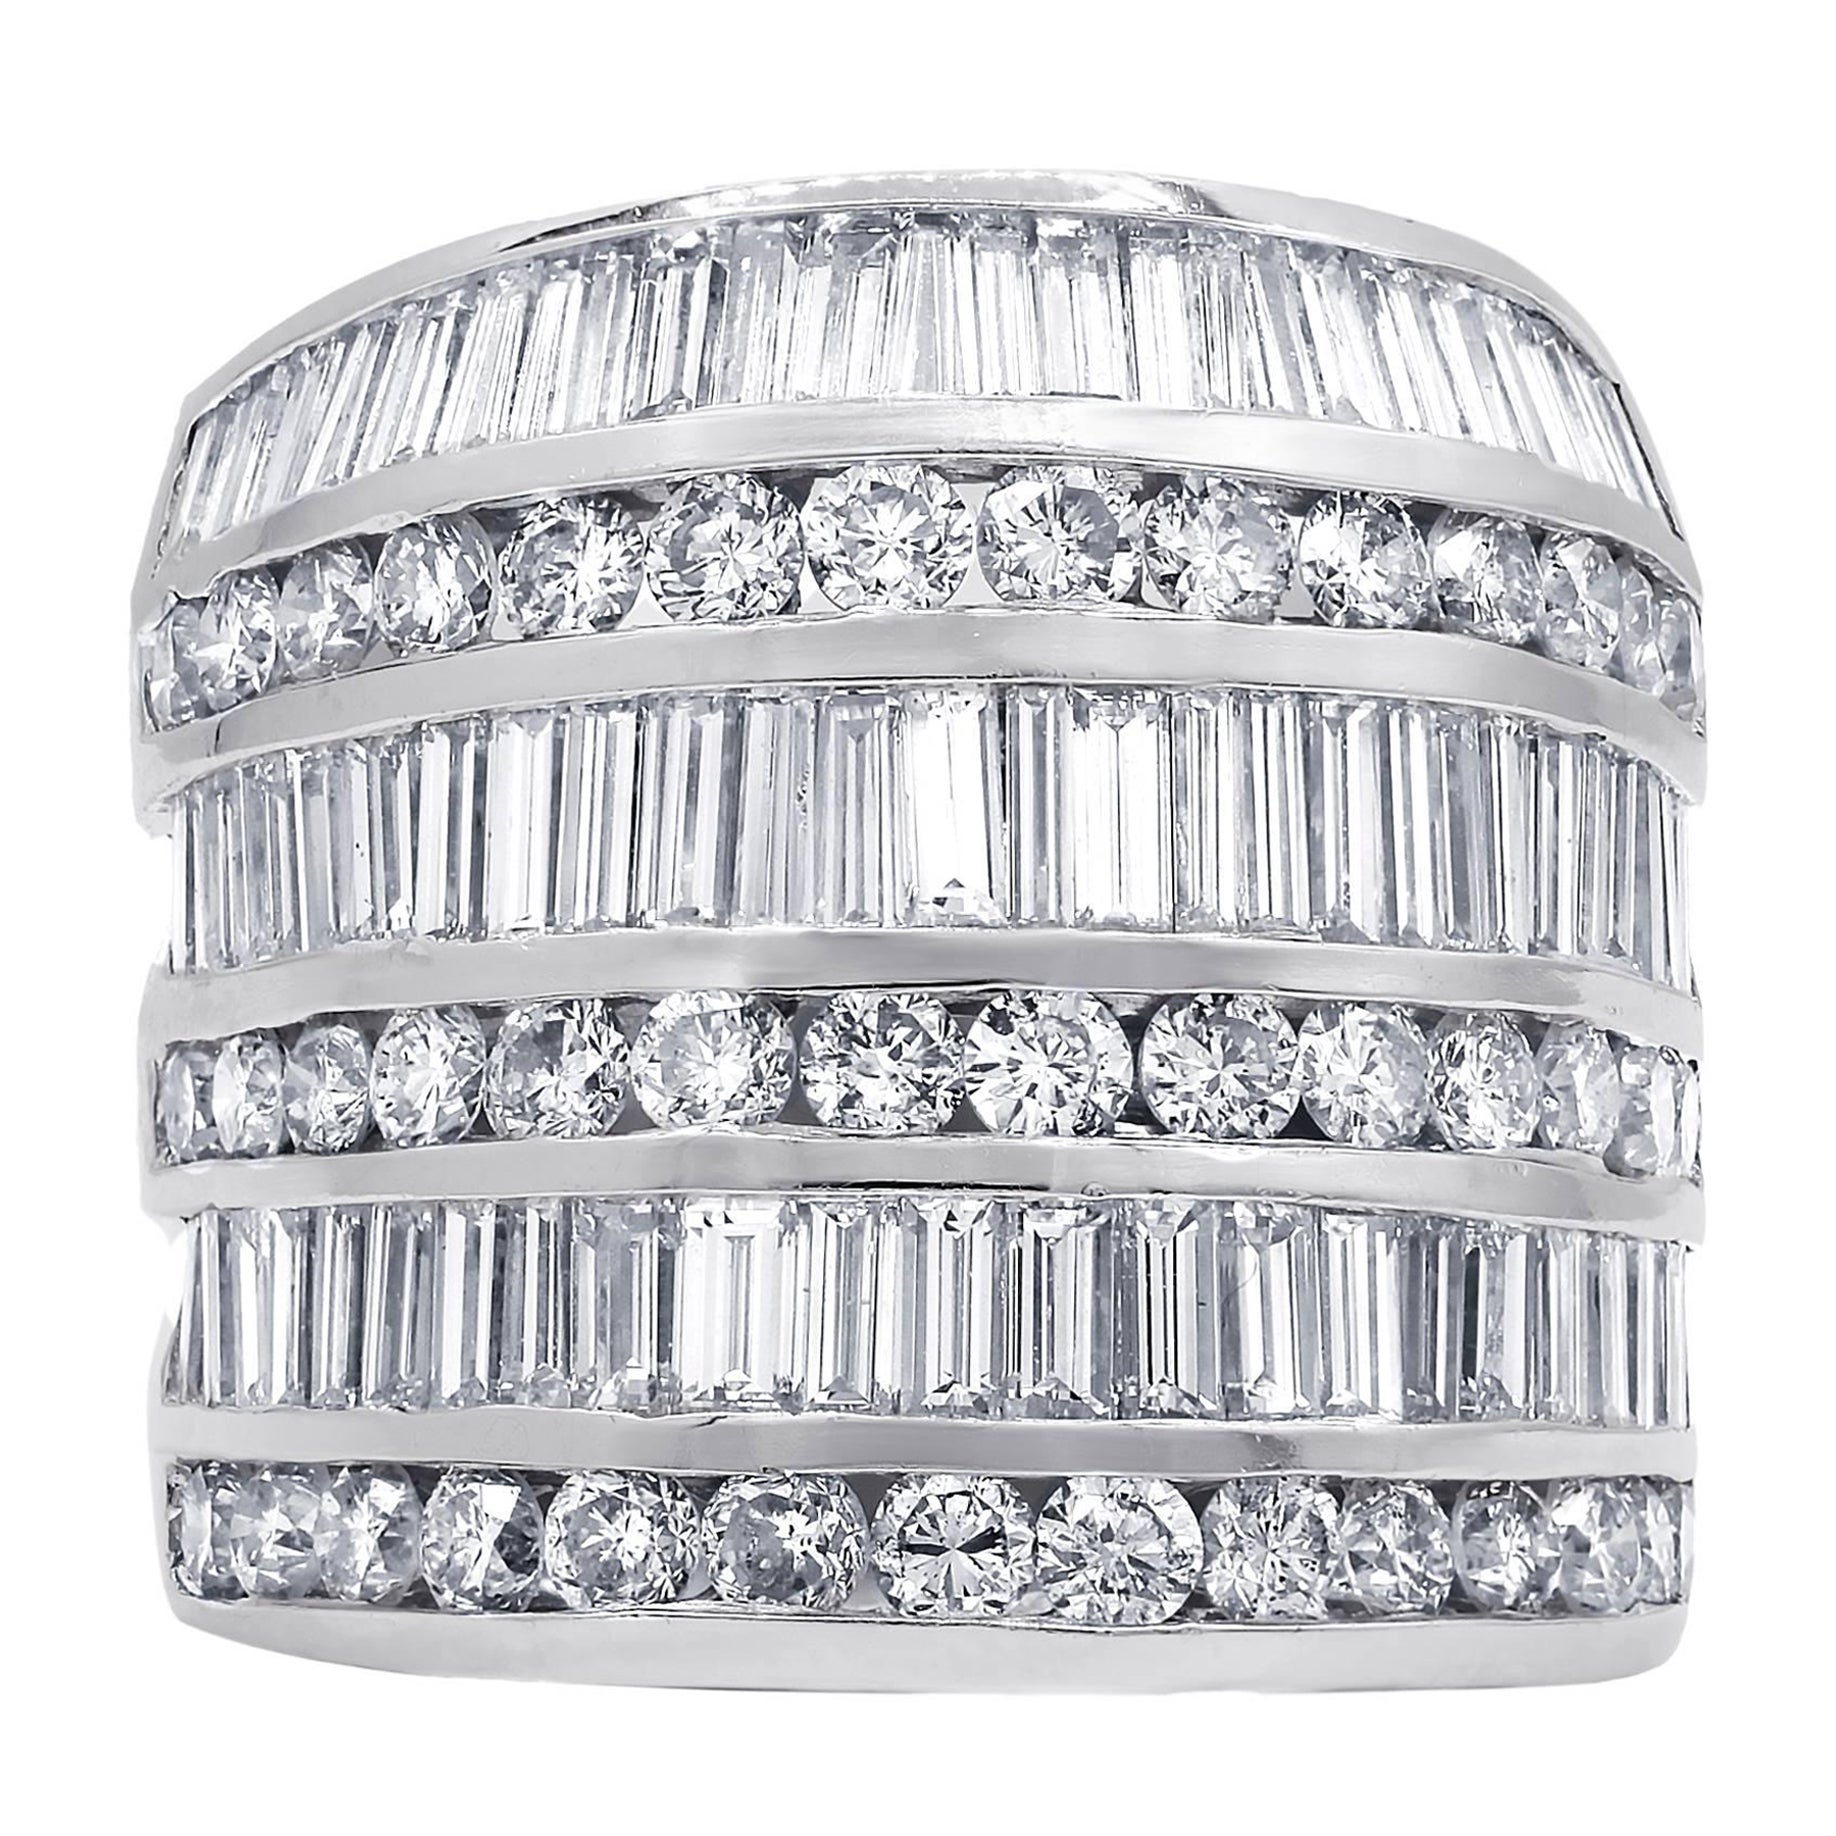 Diana M. 18 kt White Gold Diamond Fashion Ring Adorned With Alternating Rows 